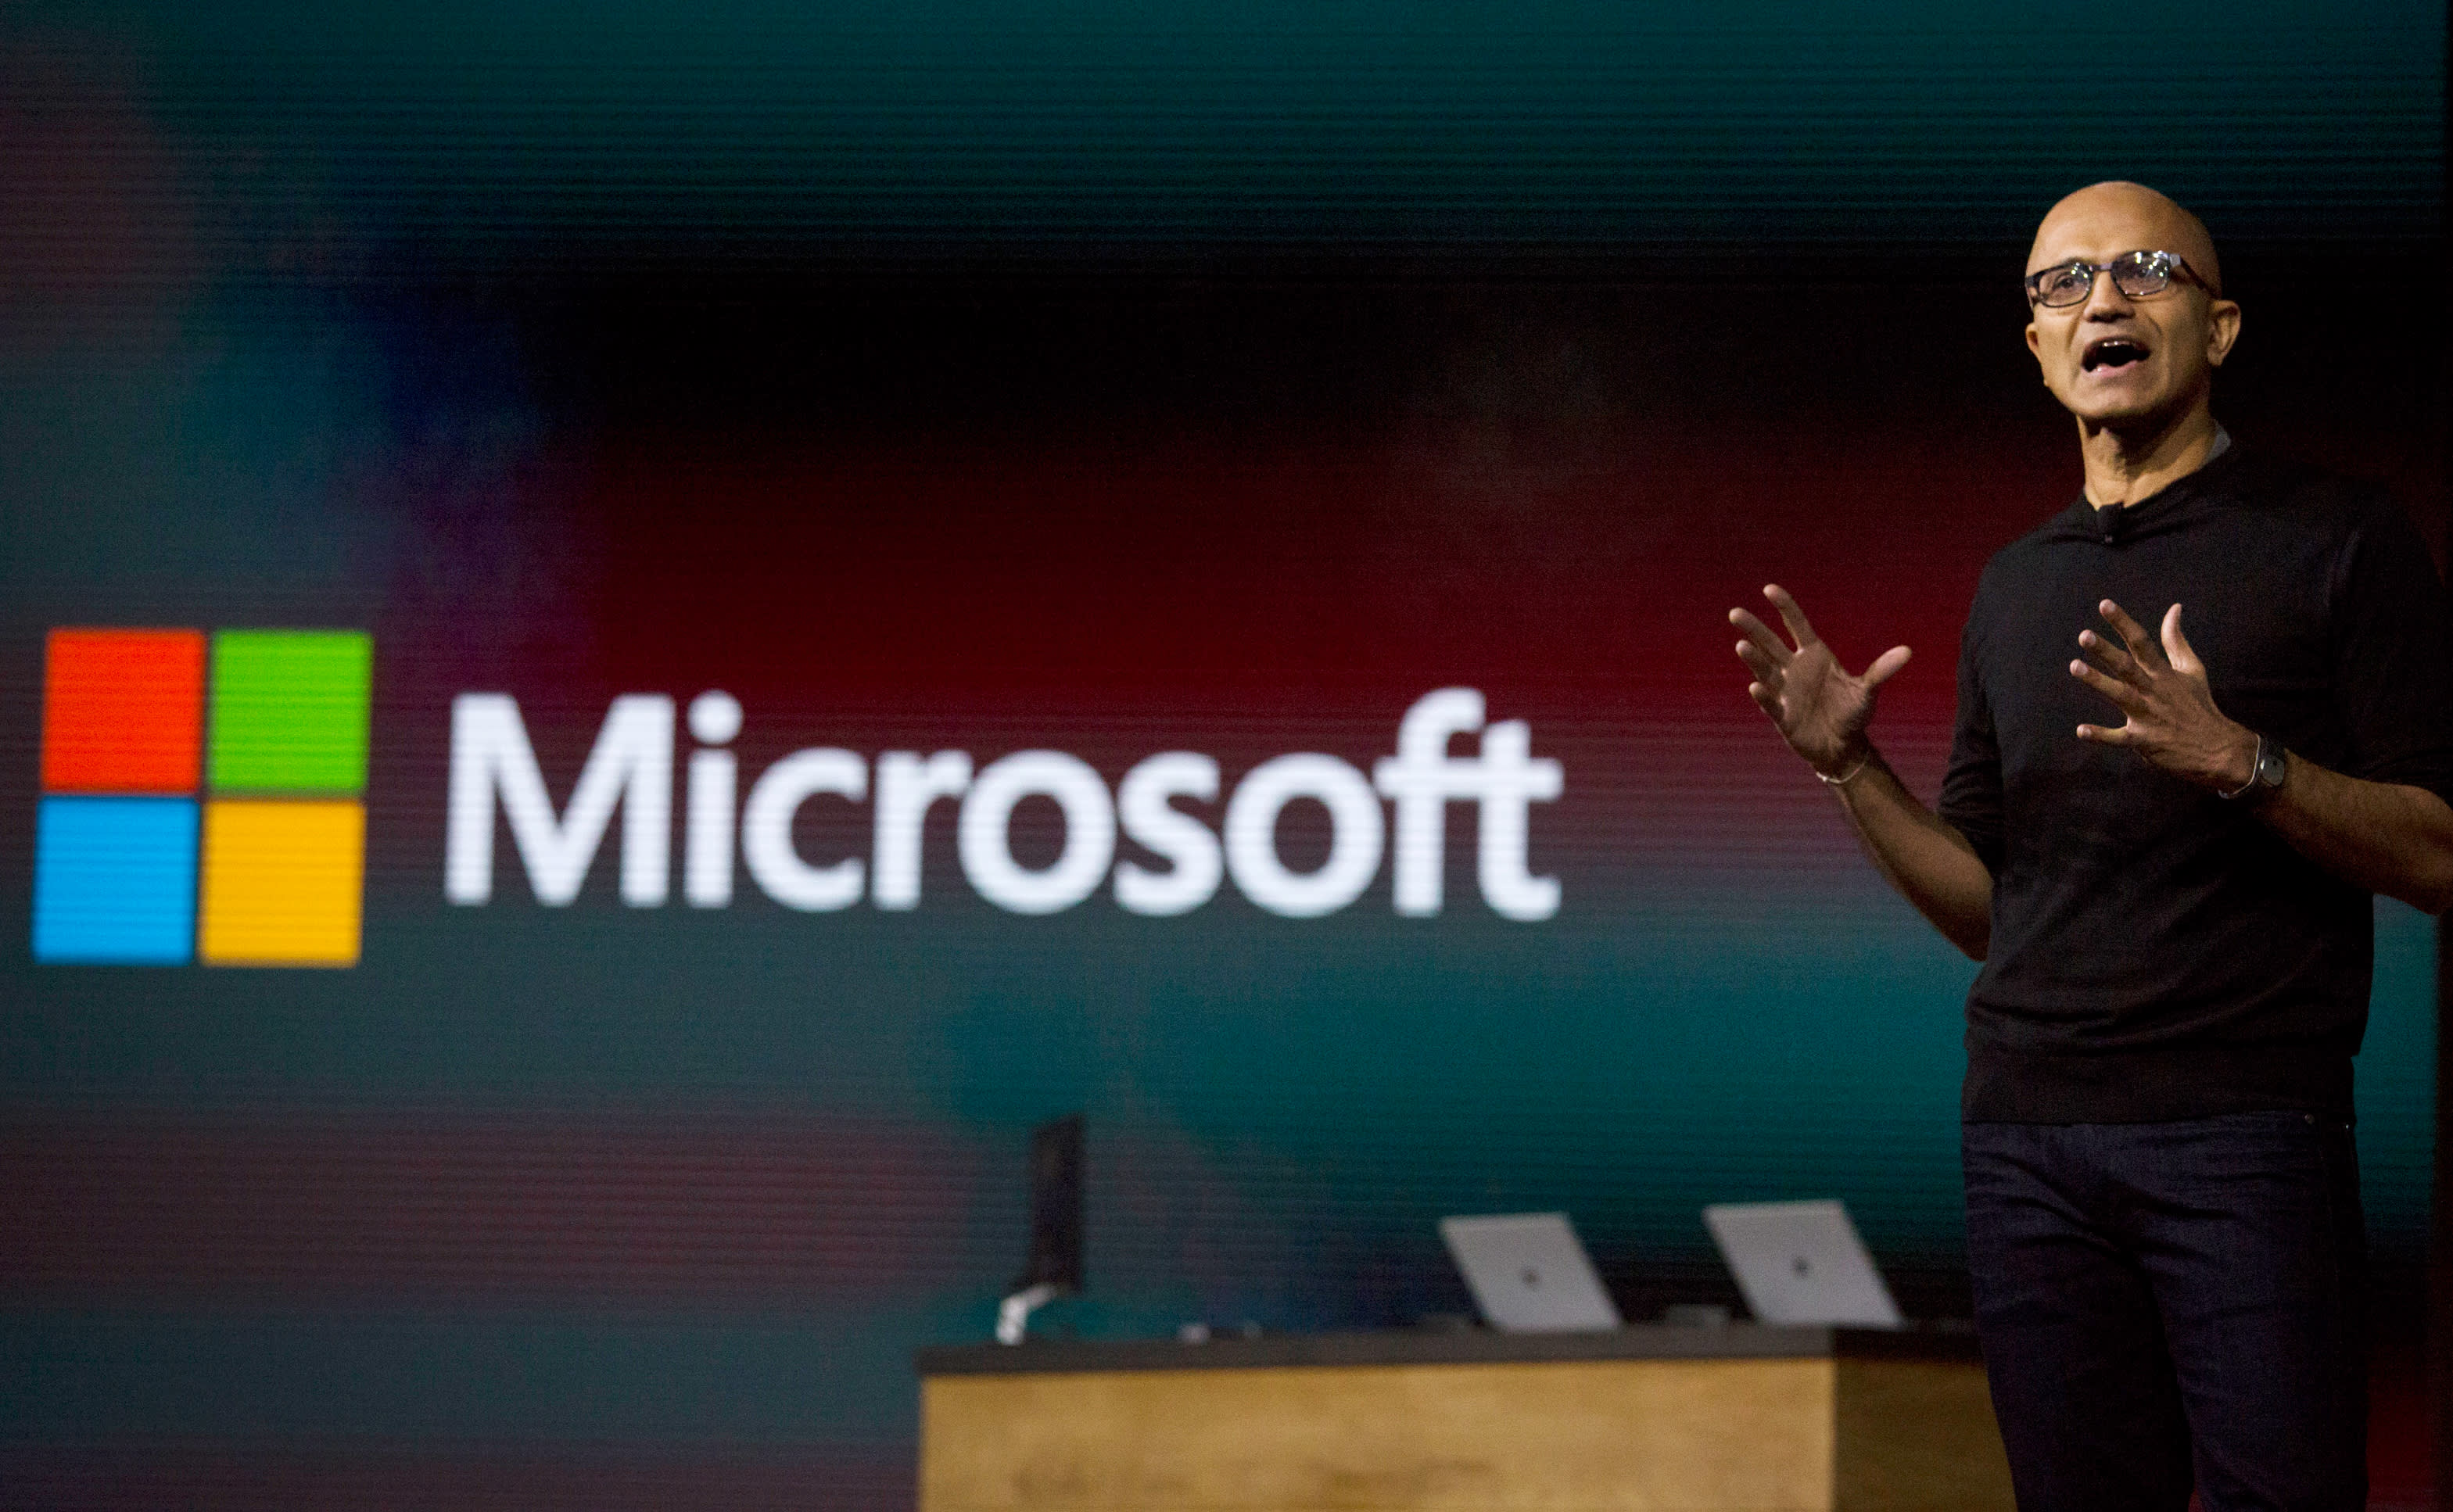 Windows 11: What to expect from Microsoft's latest version of its operating  system